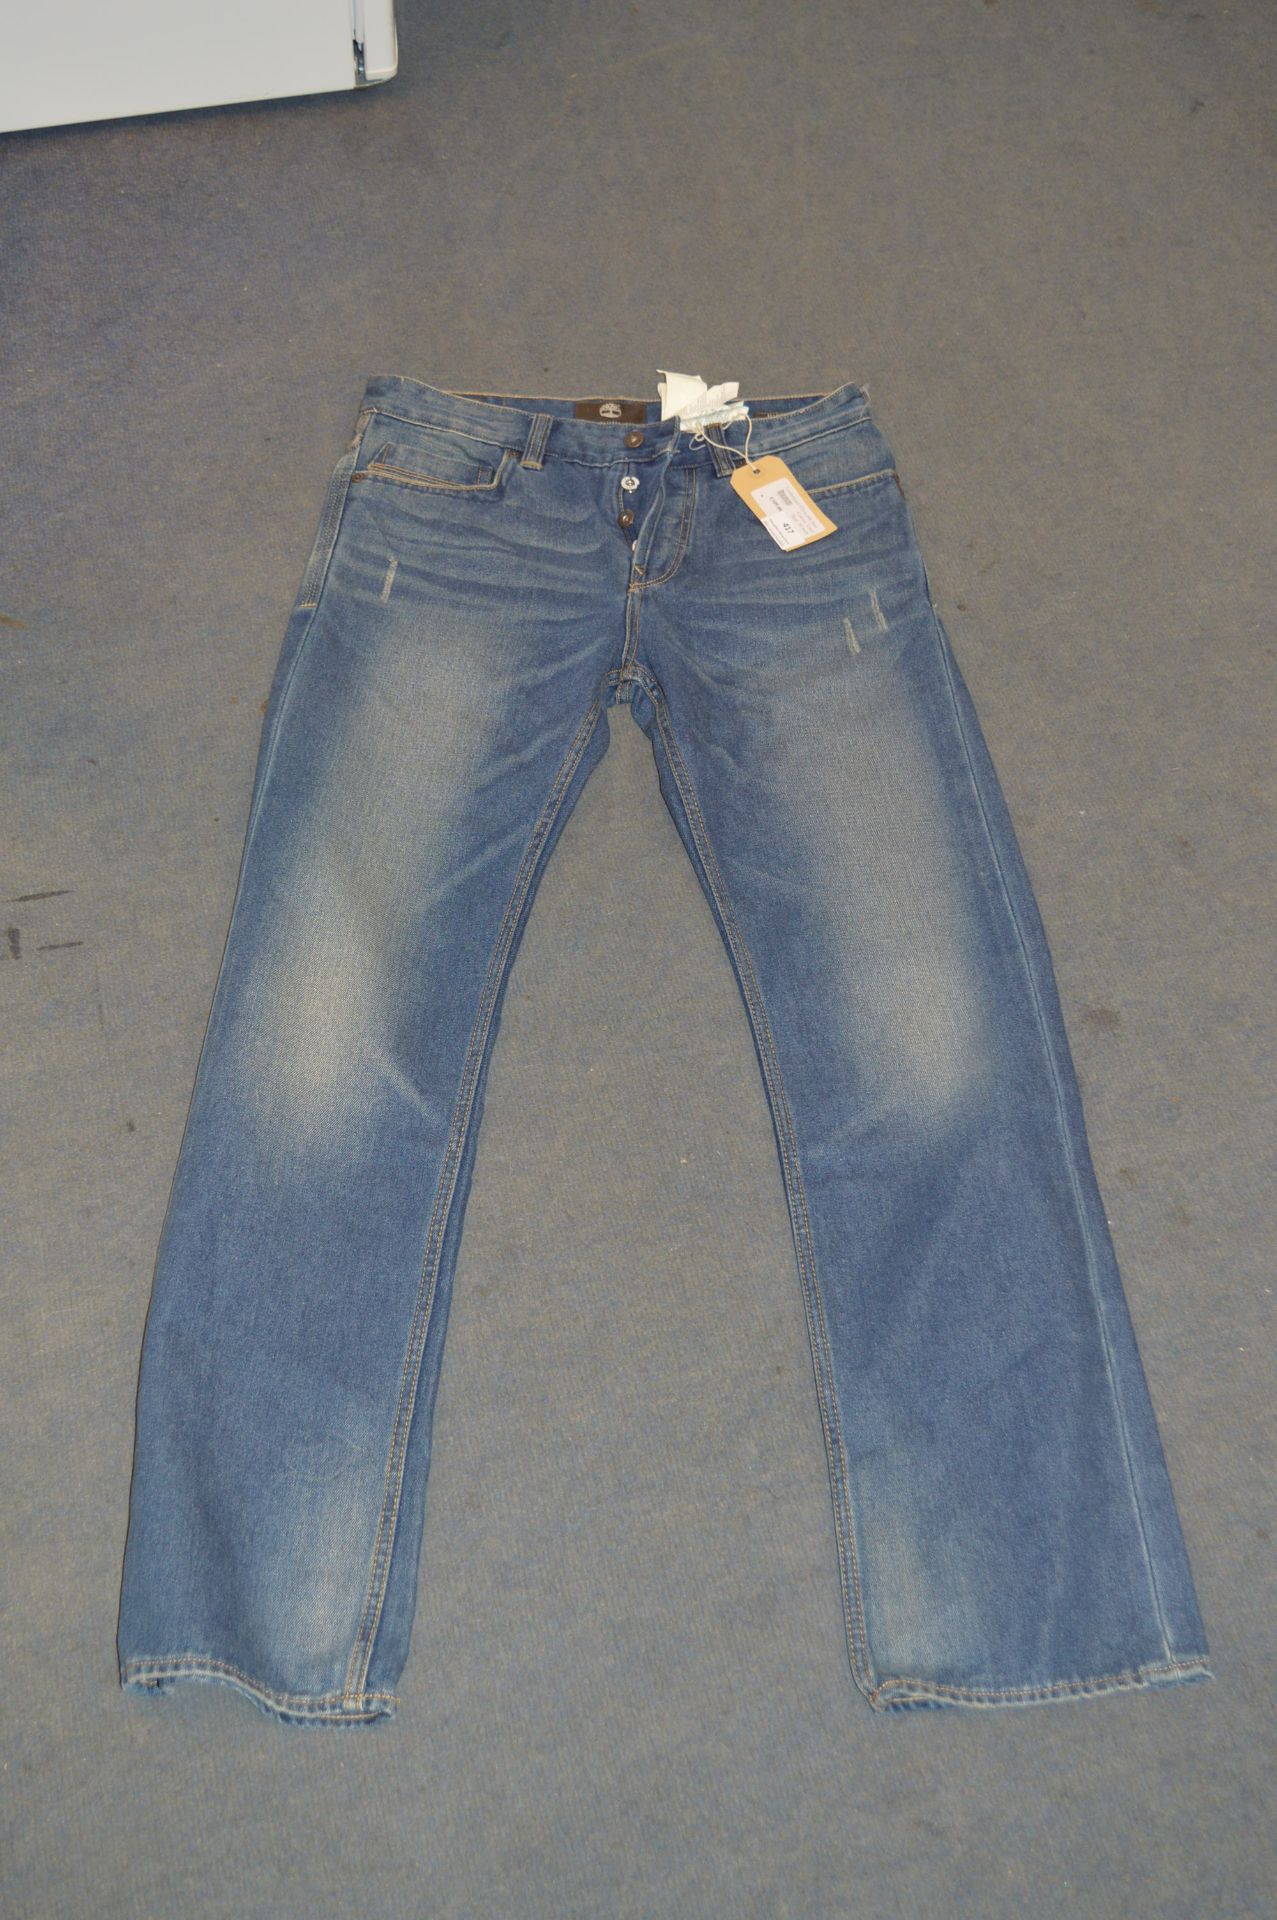 *Pair of Timberland Jeans Size:30"